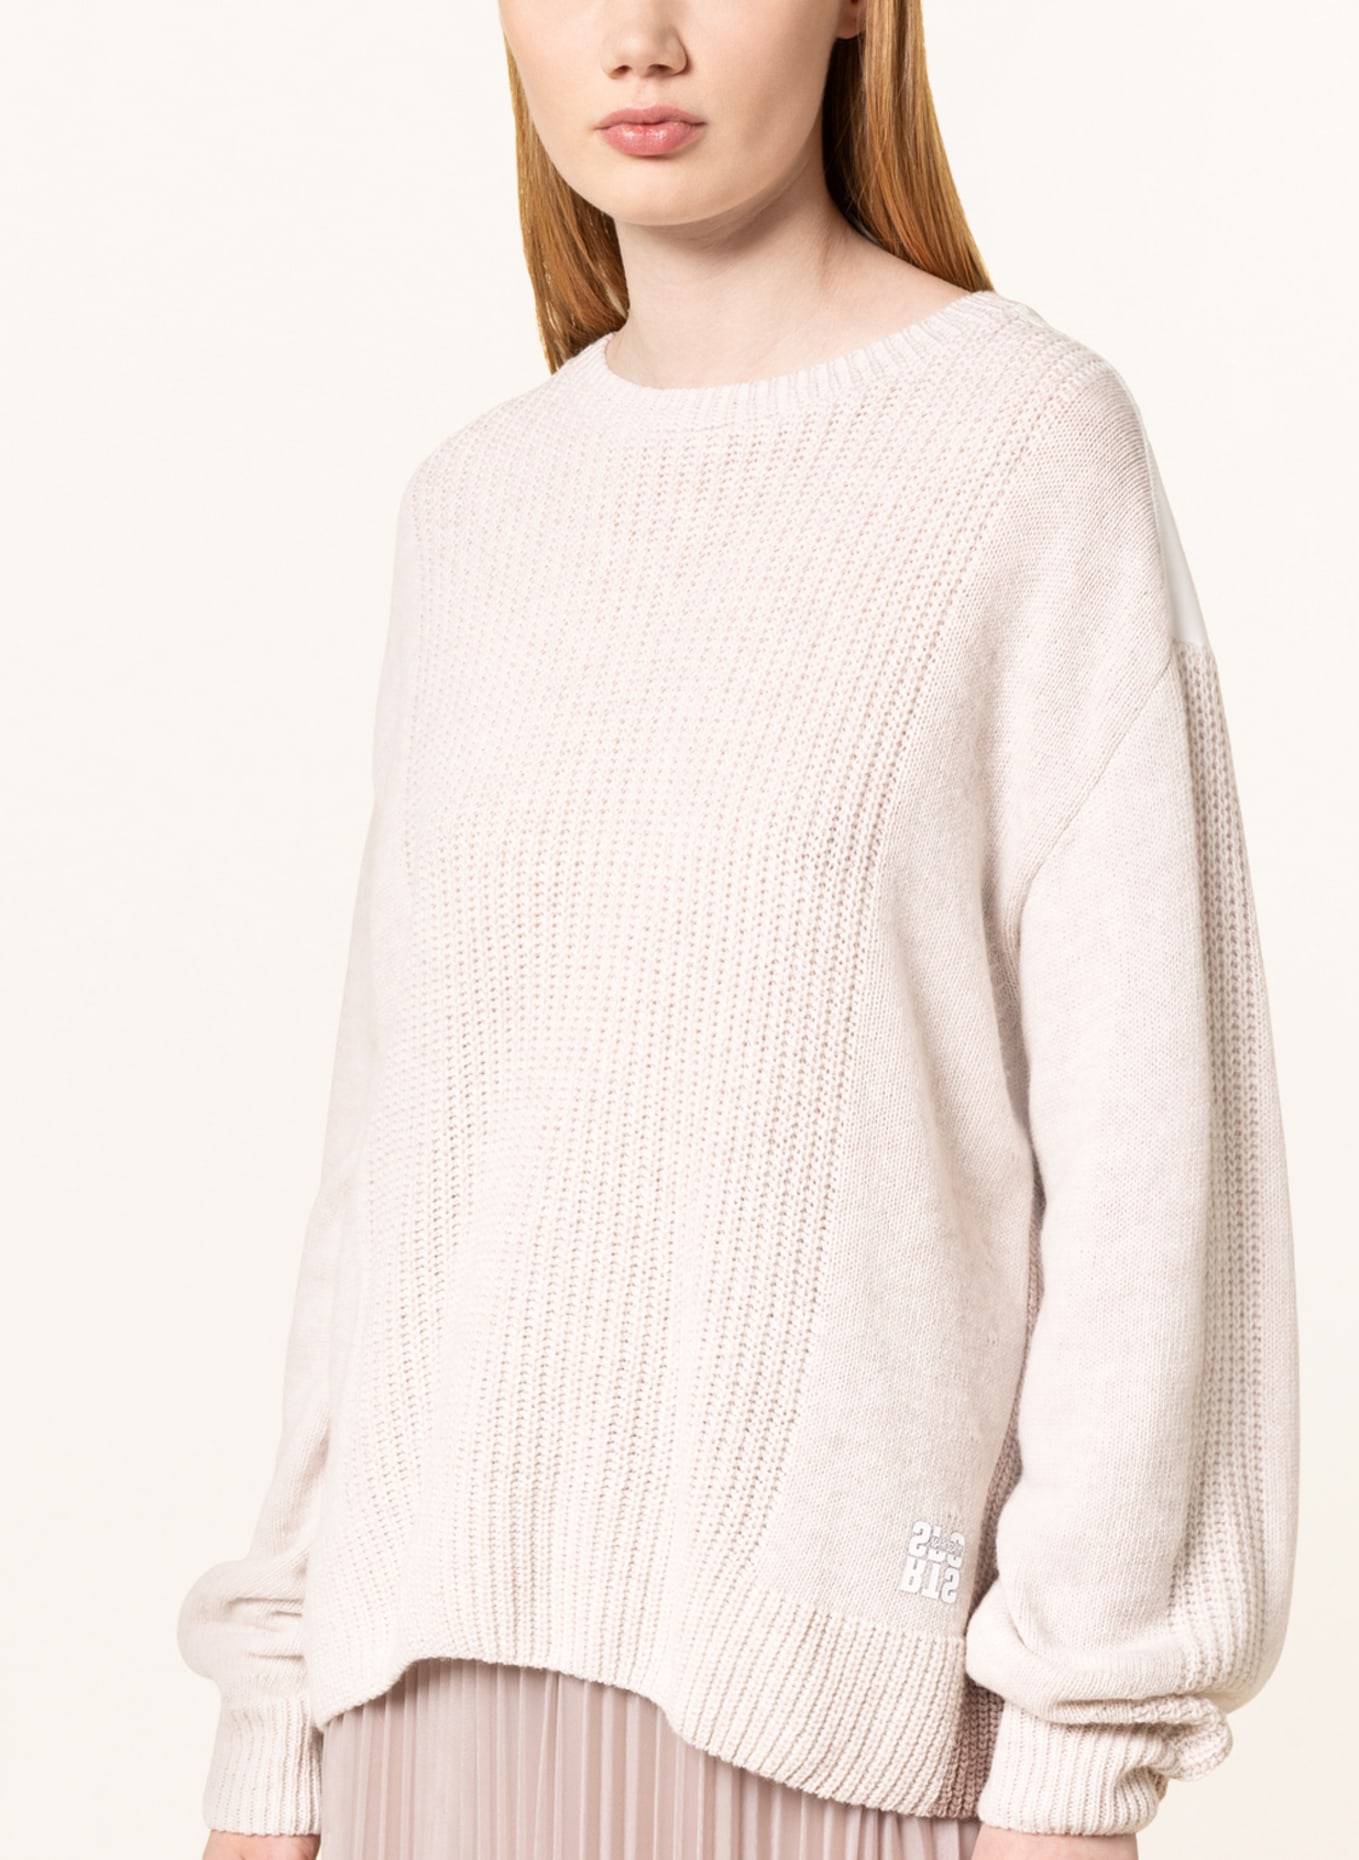 MARC CAIN Pullover im Materialmix, Farbe: 609 light taupe (Bild 4)